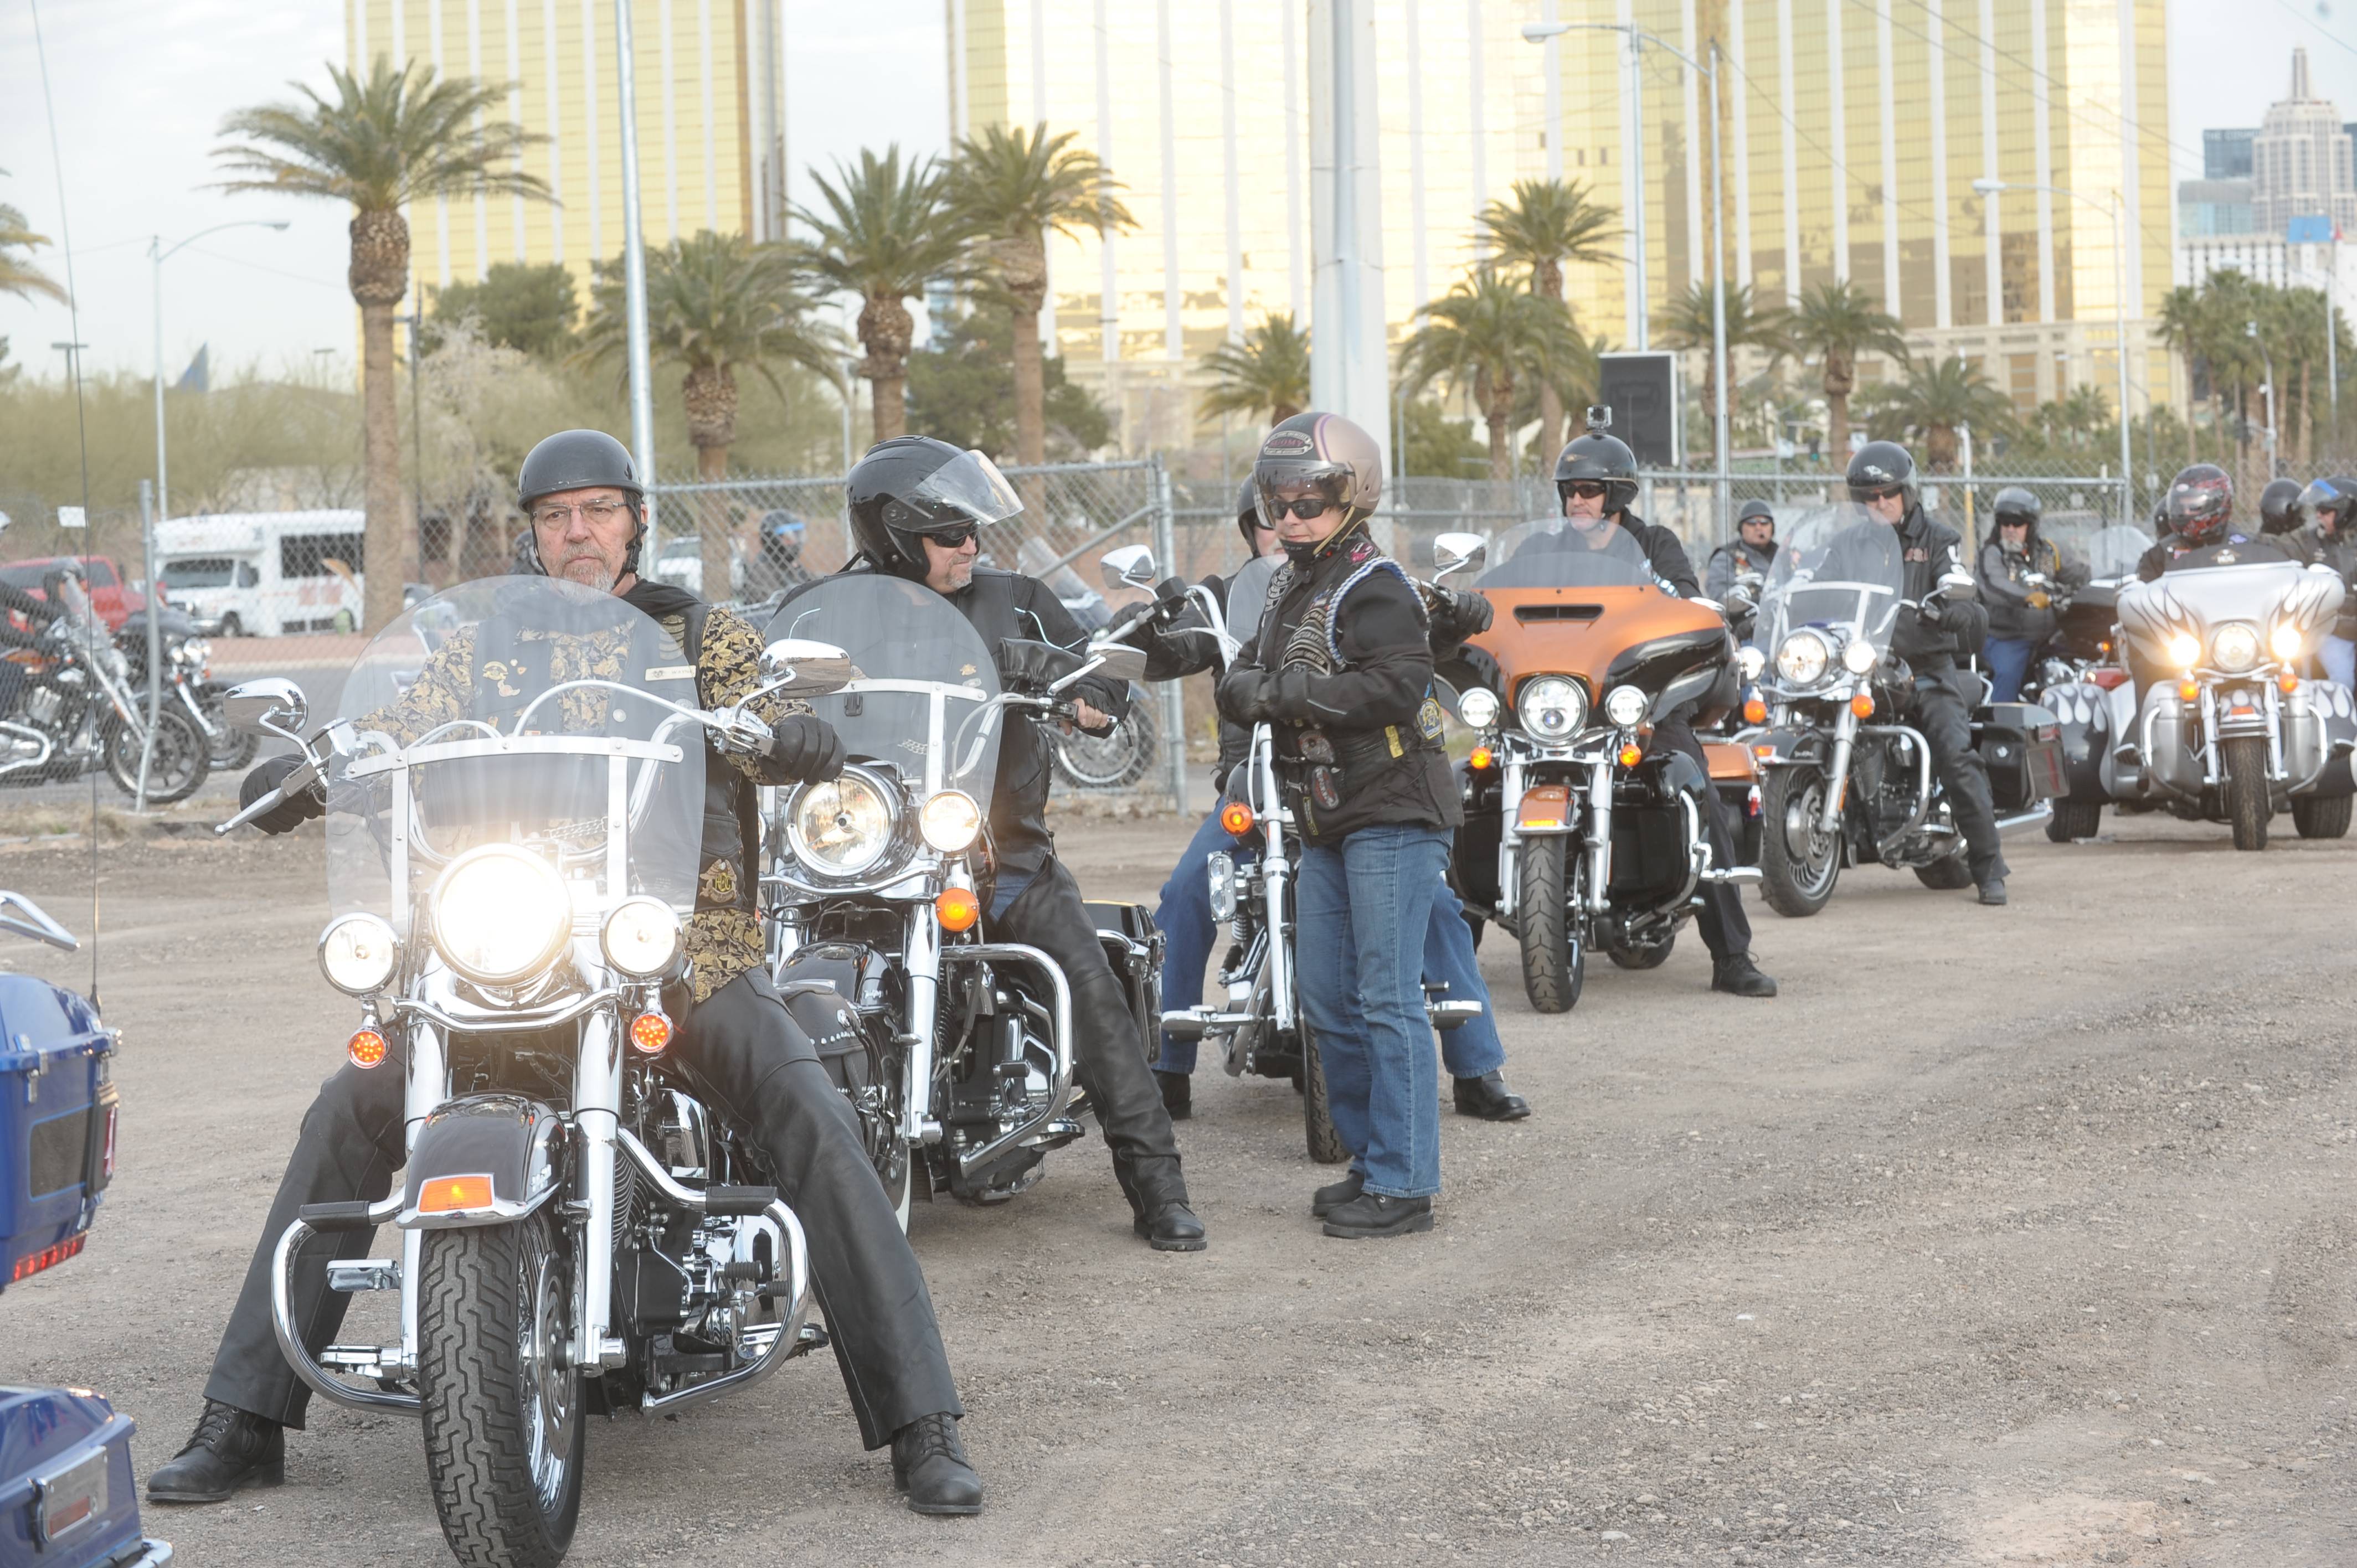 Harley Owners Group members rev their engines to signal the ground shaking for the new Las Vegas Harley-Davidson dealership on the Las Vegas Strip